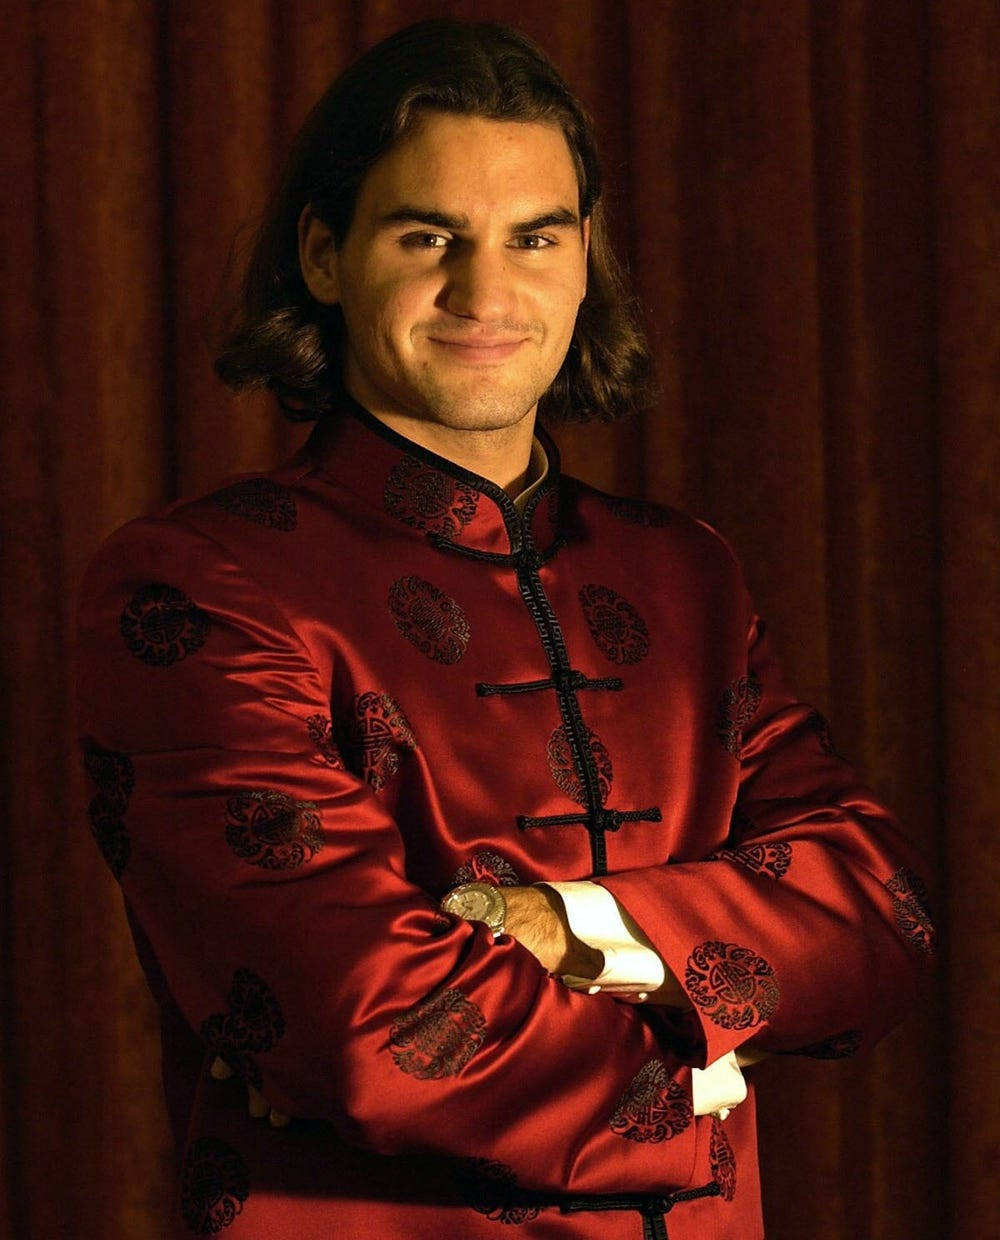 Roger Federer In Chinese Outfit Wallpaper